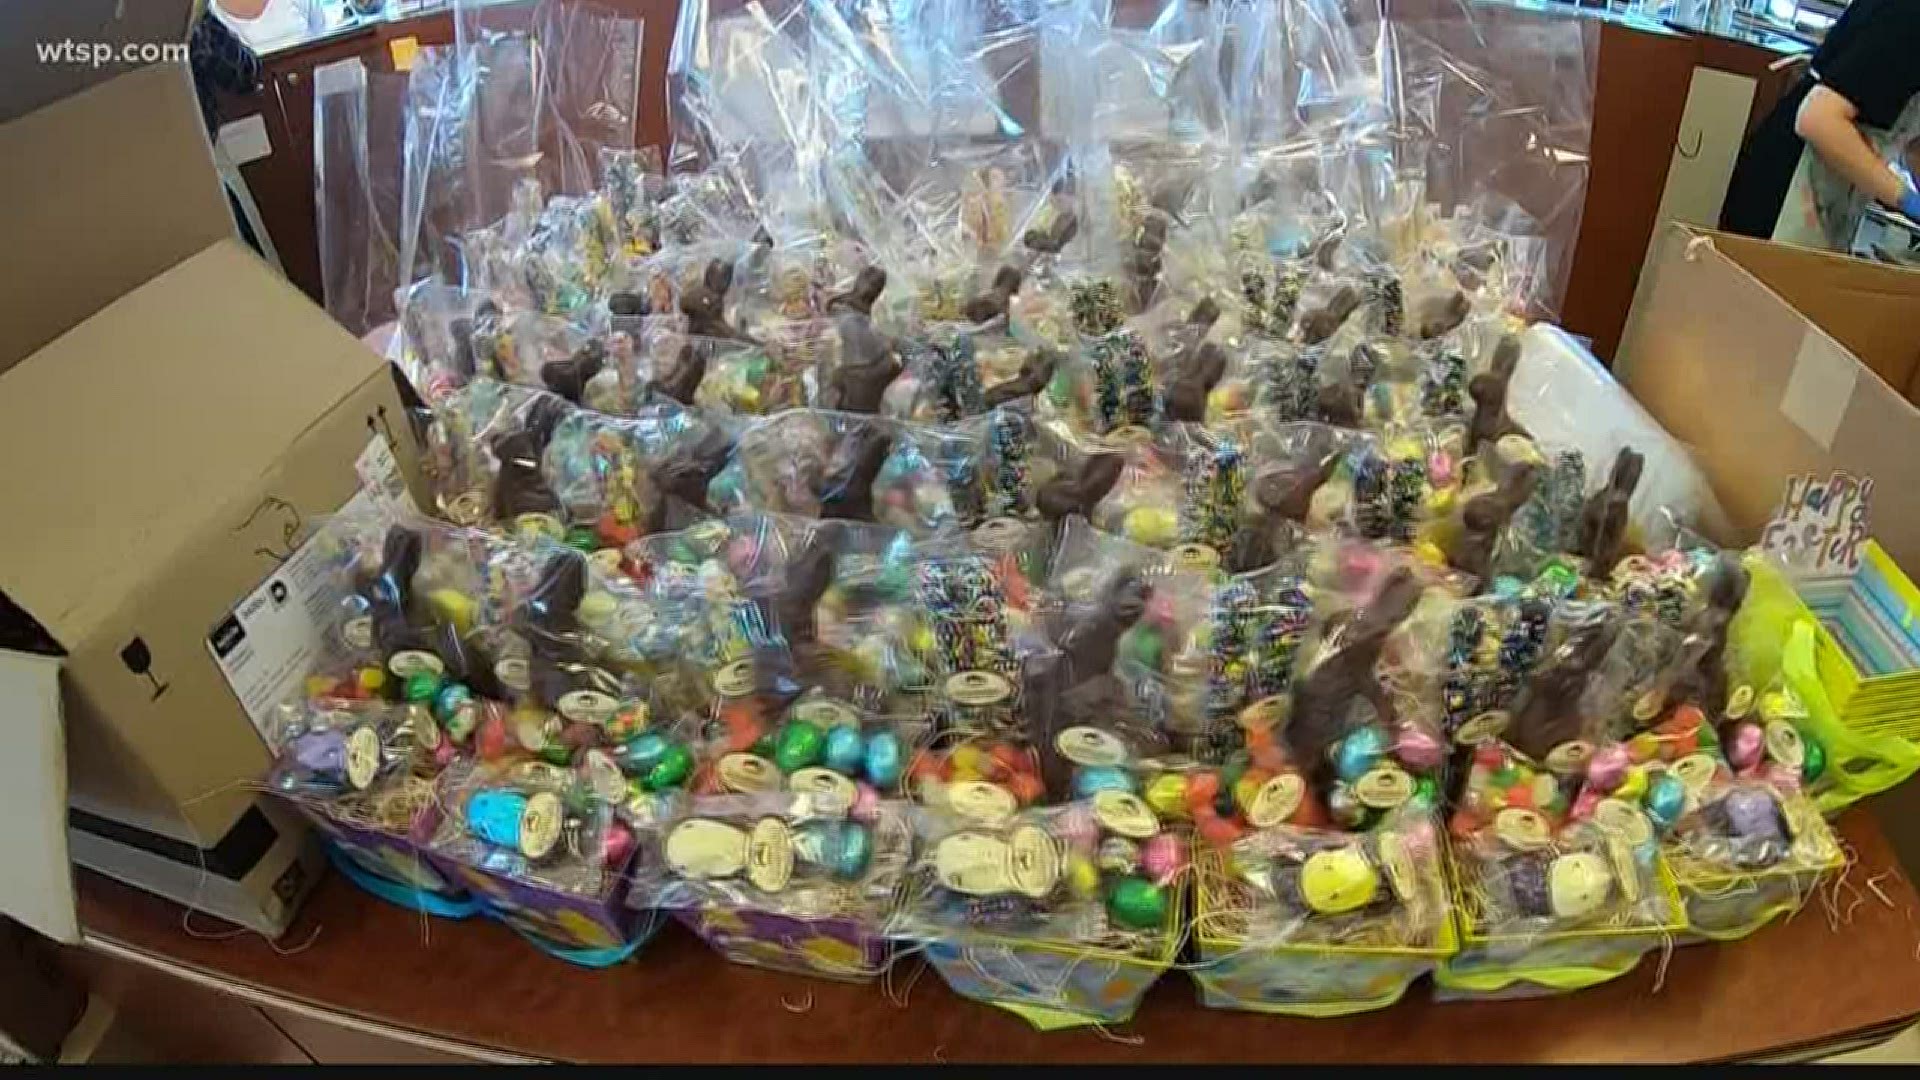 The workers at Schakolad Chocolate Factory are creating Easter baskets to bring joy to kids this weekend.